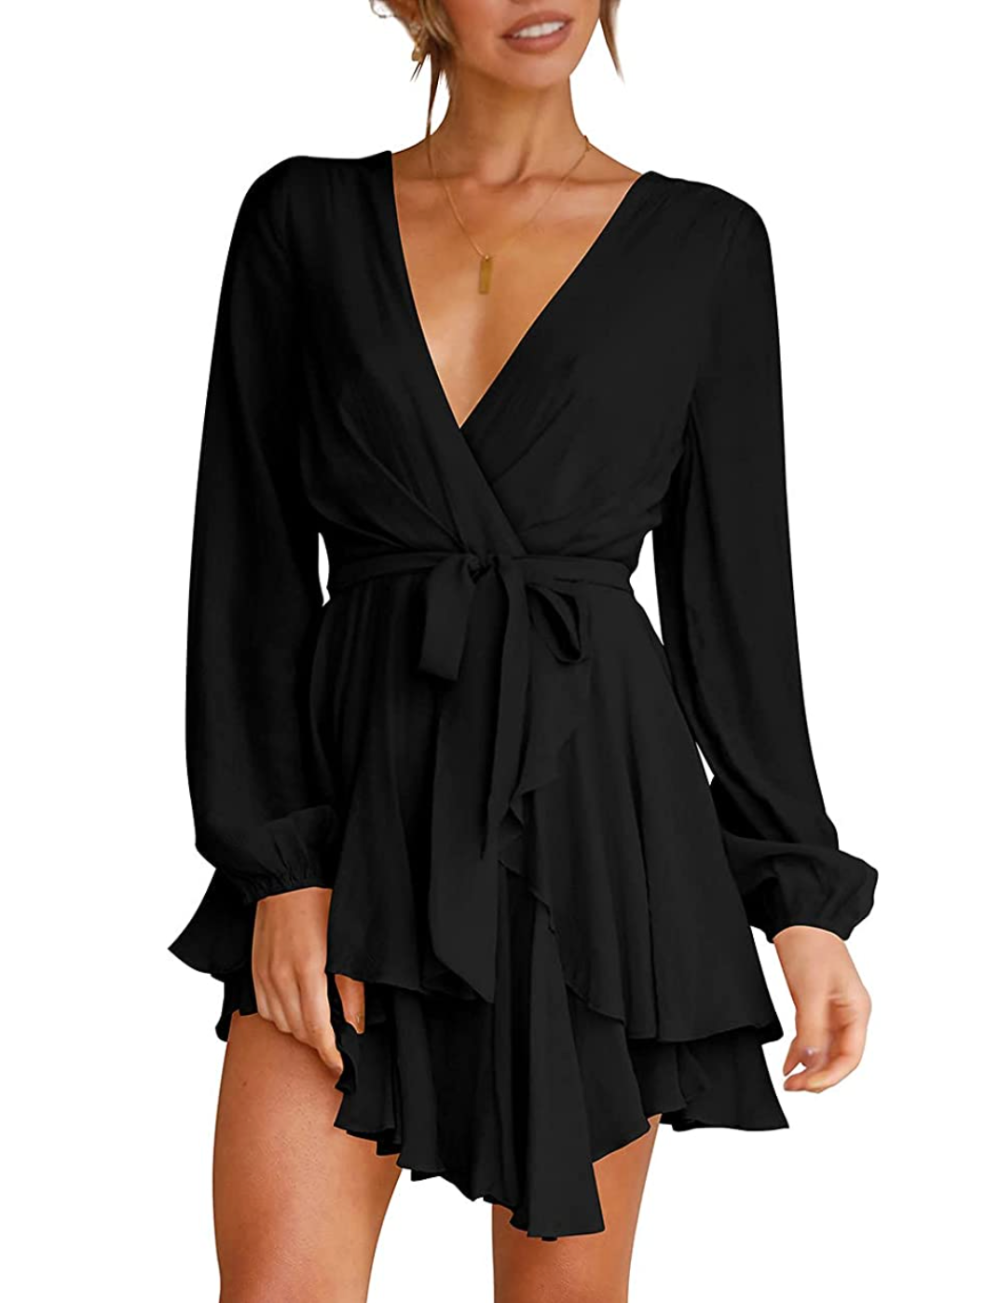 13 Chic Black Dresses You Can Wear as a Wedding Guest